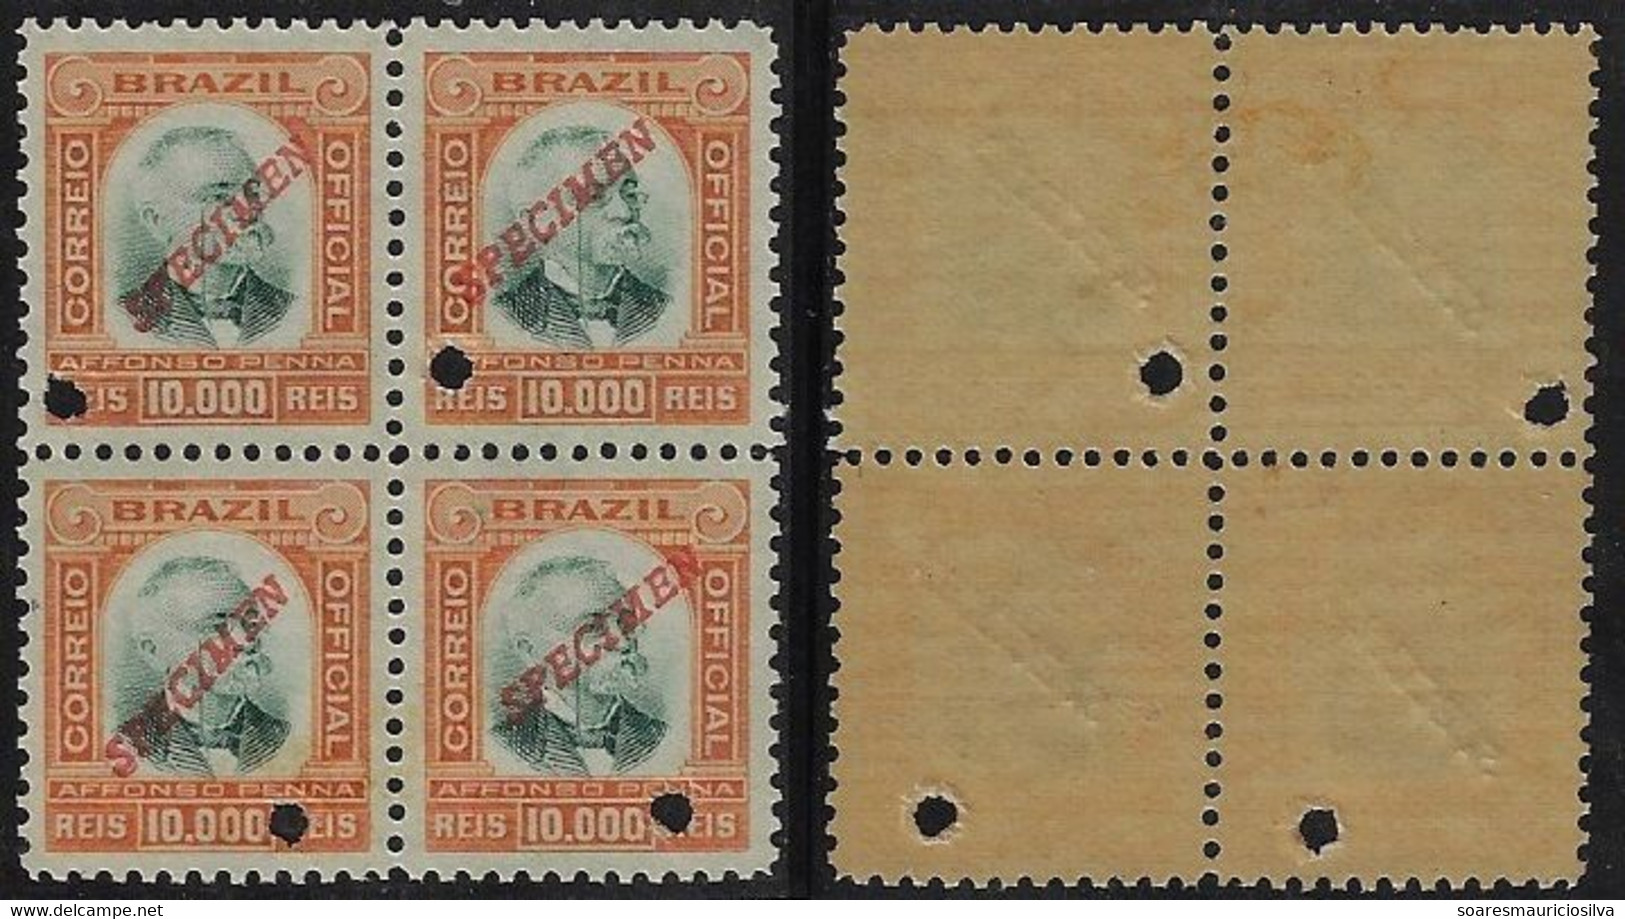 Brazil 1906 RHM-Official-13 President Afonso Pena 10,000 Réis Block Of 4 Stamp With Hole And Overprint Specimen Unused - Officials